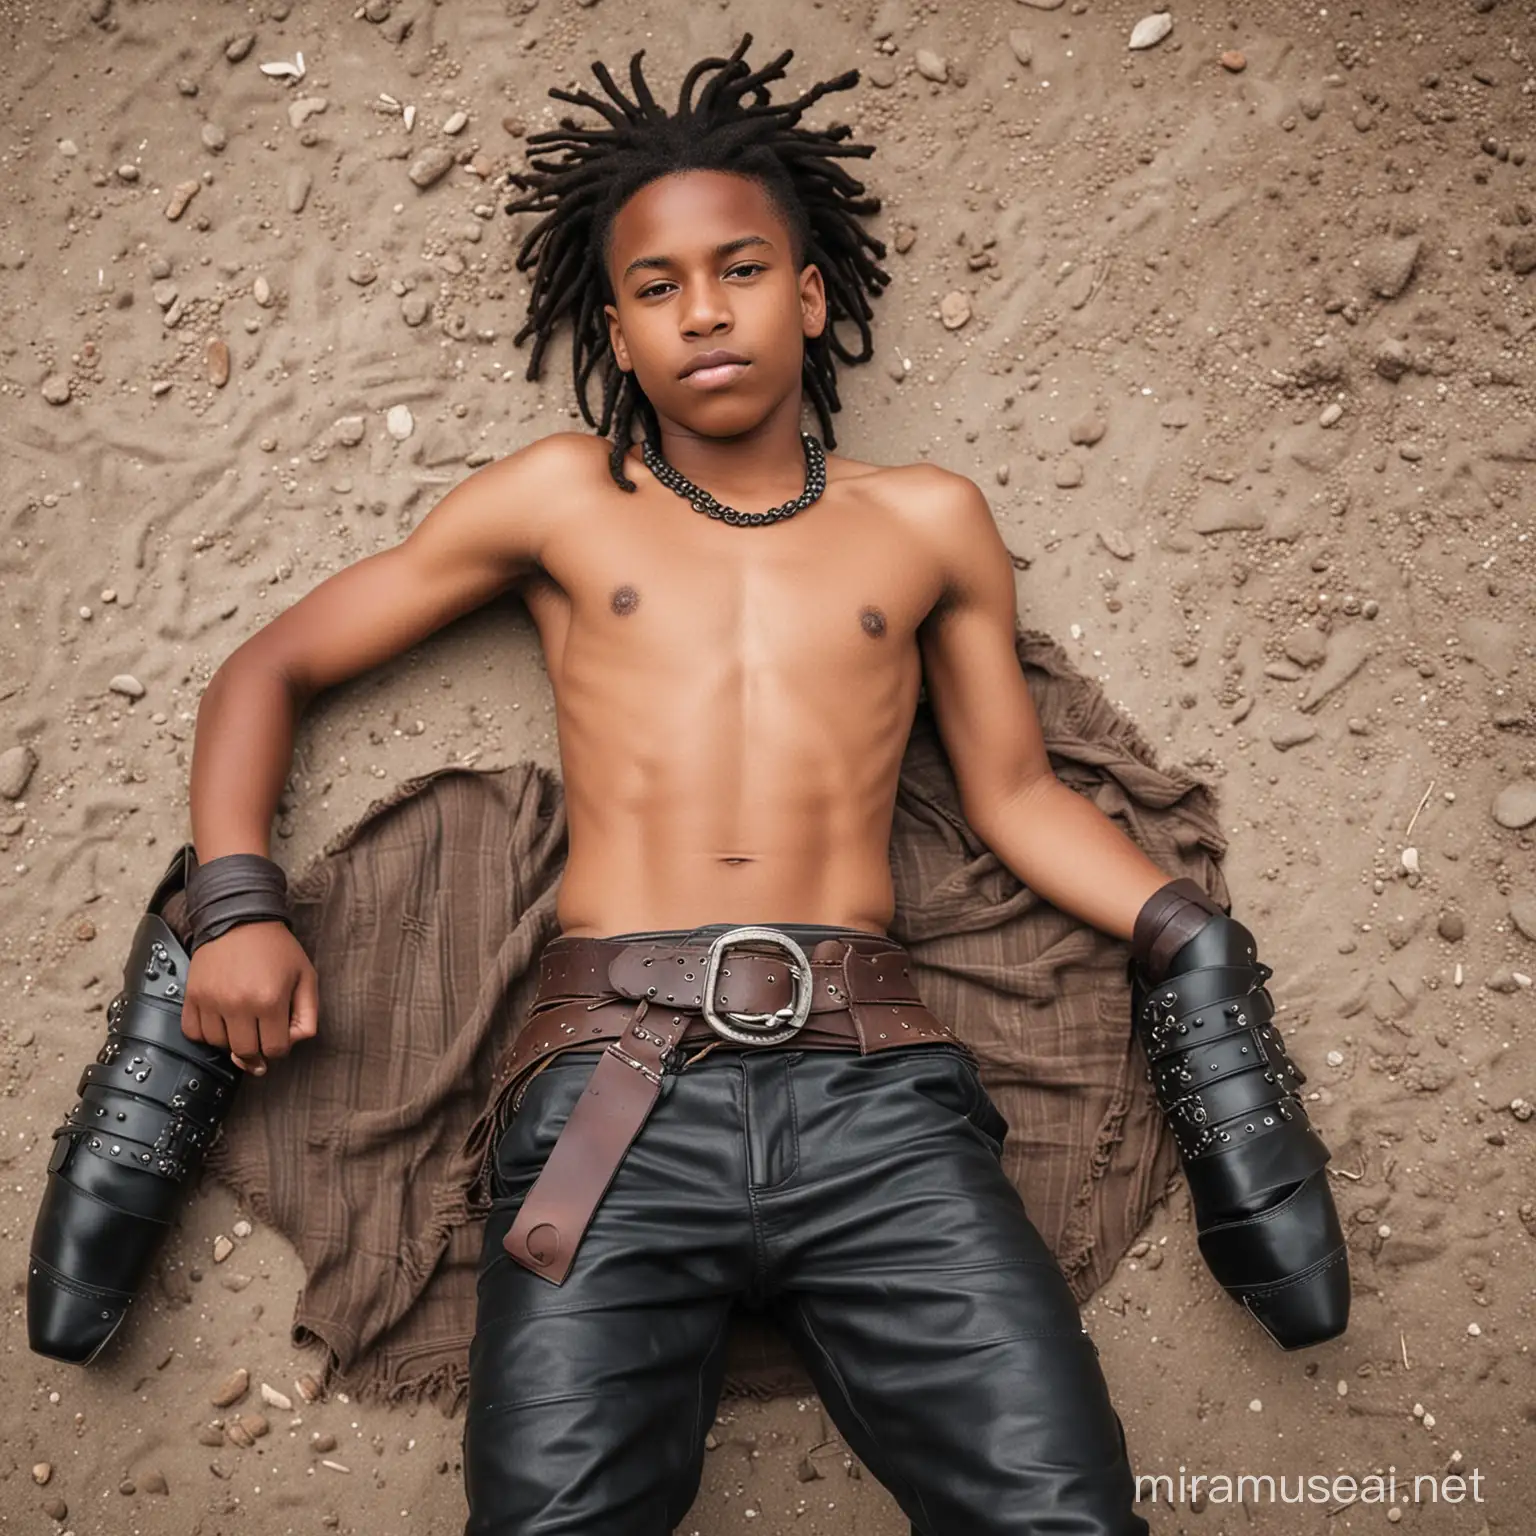 Young Shirtless Teenage Warrior with Dreadlocks Resting on Ground